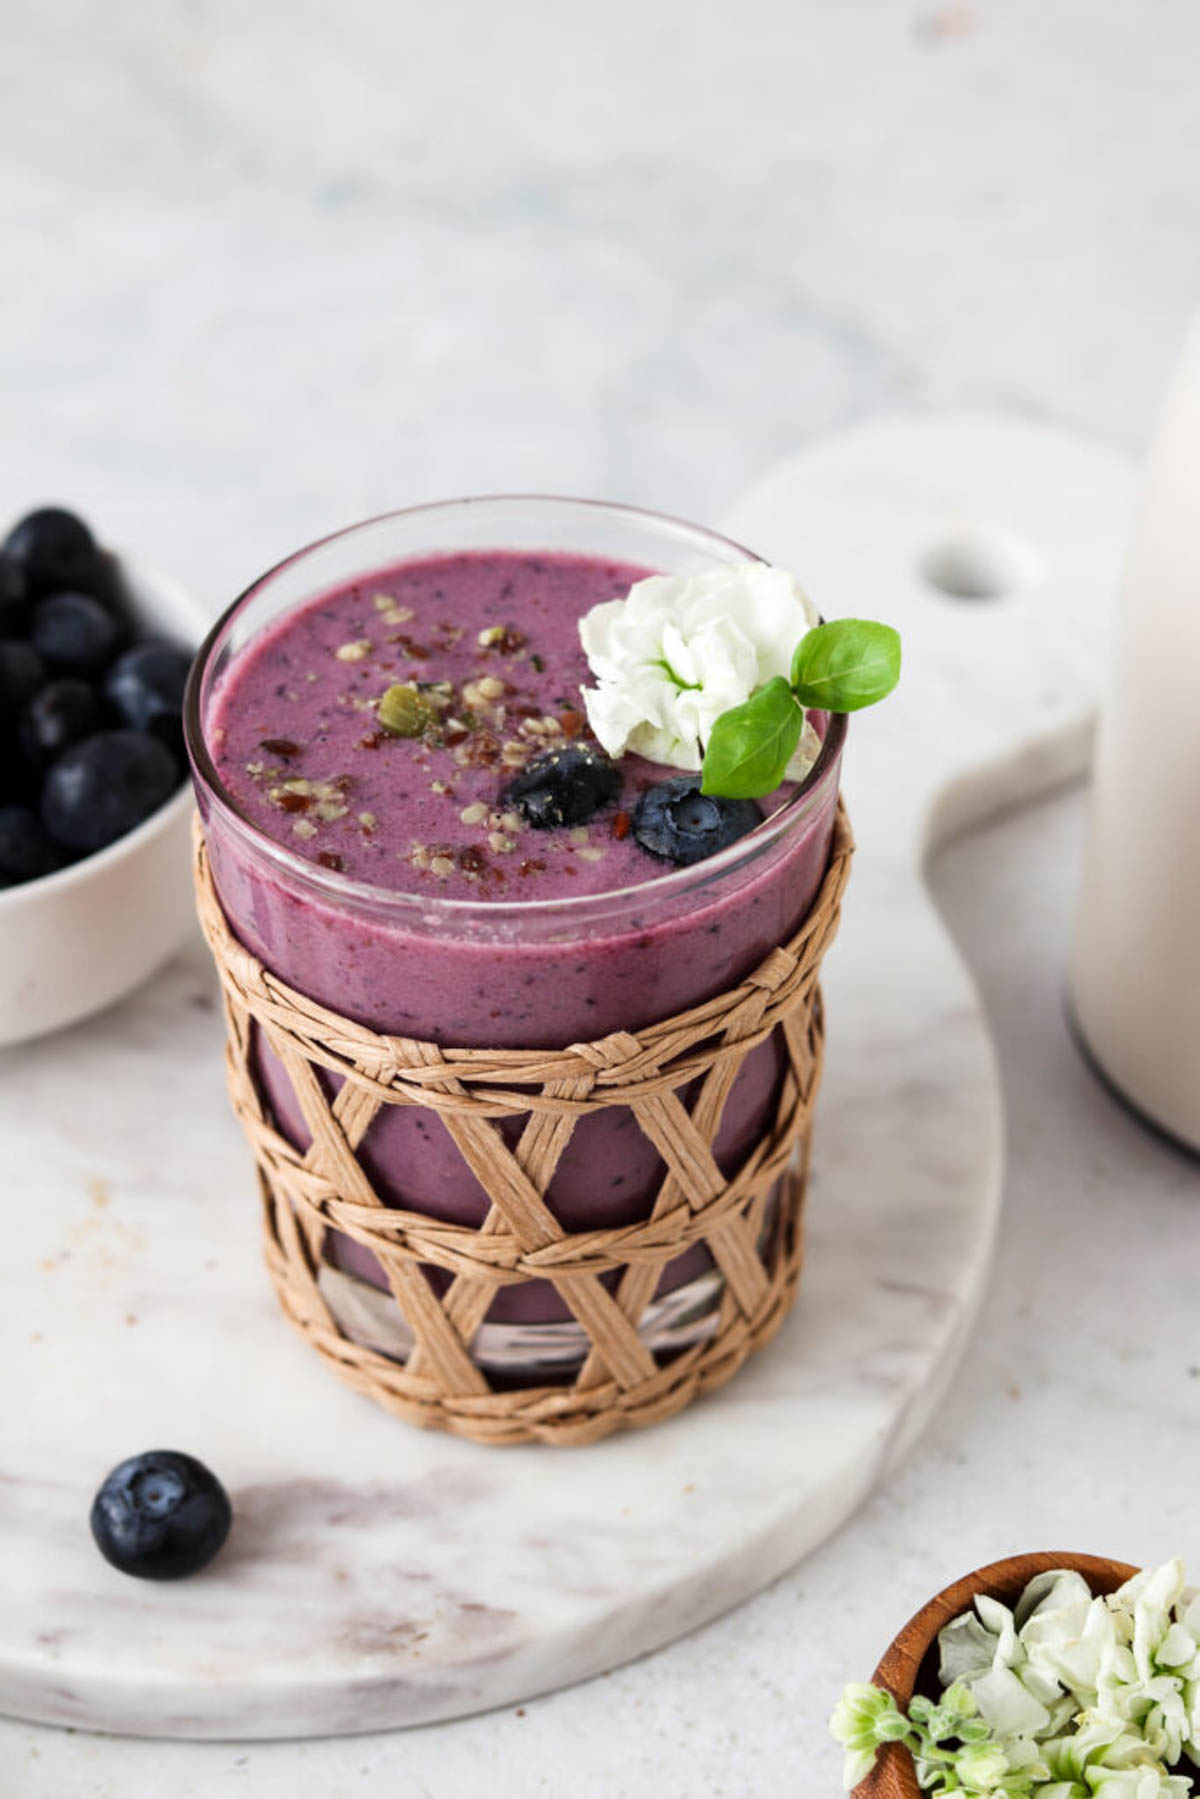 Strawberry blueberry smoothie in a glass cup garnished with seeds, fresh blueberries, and a fresh white flower.